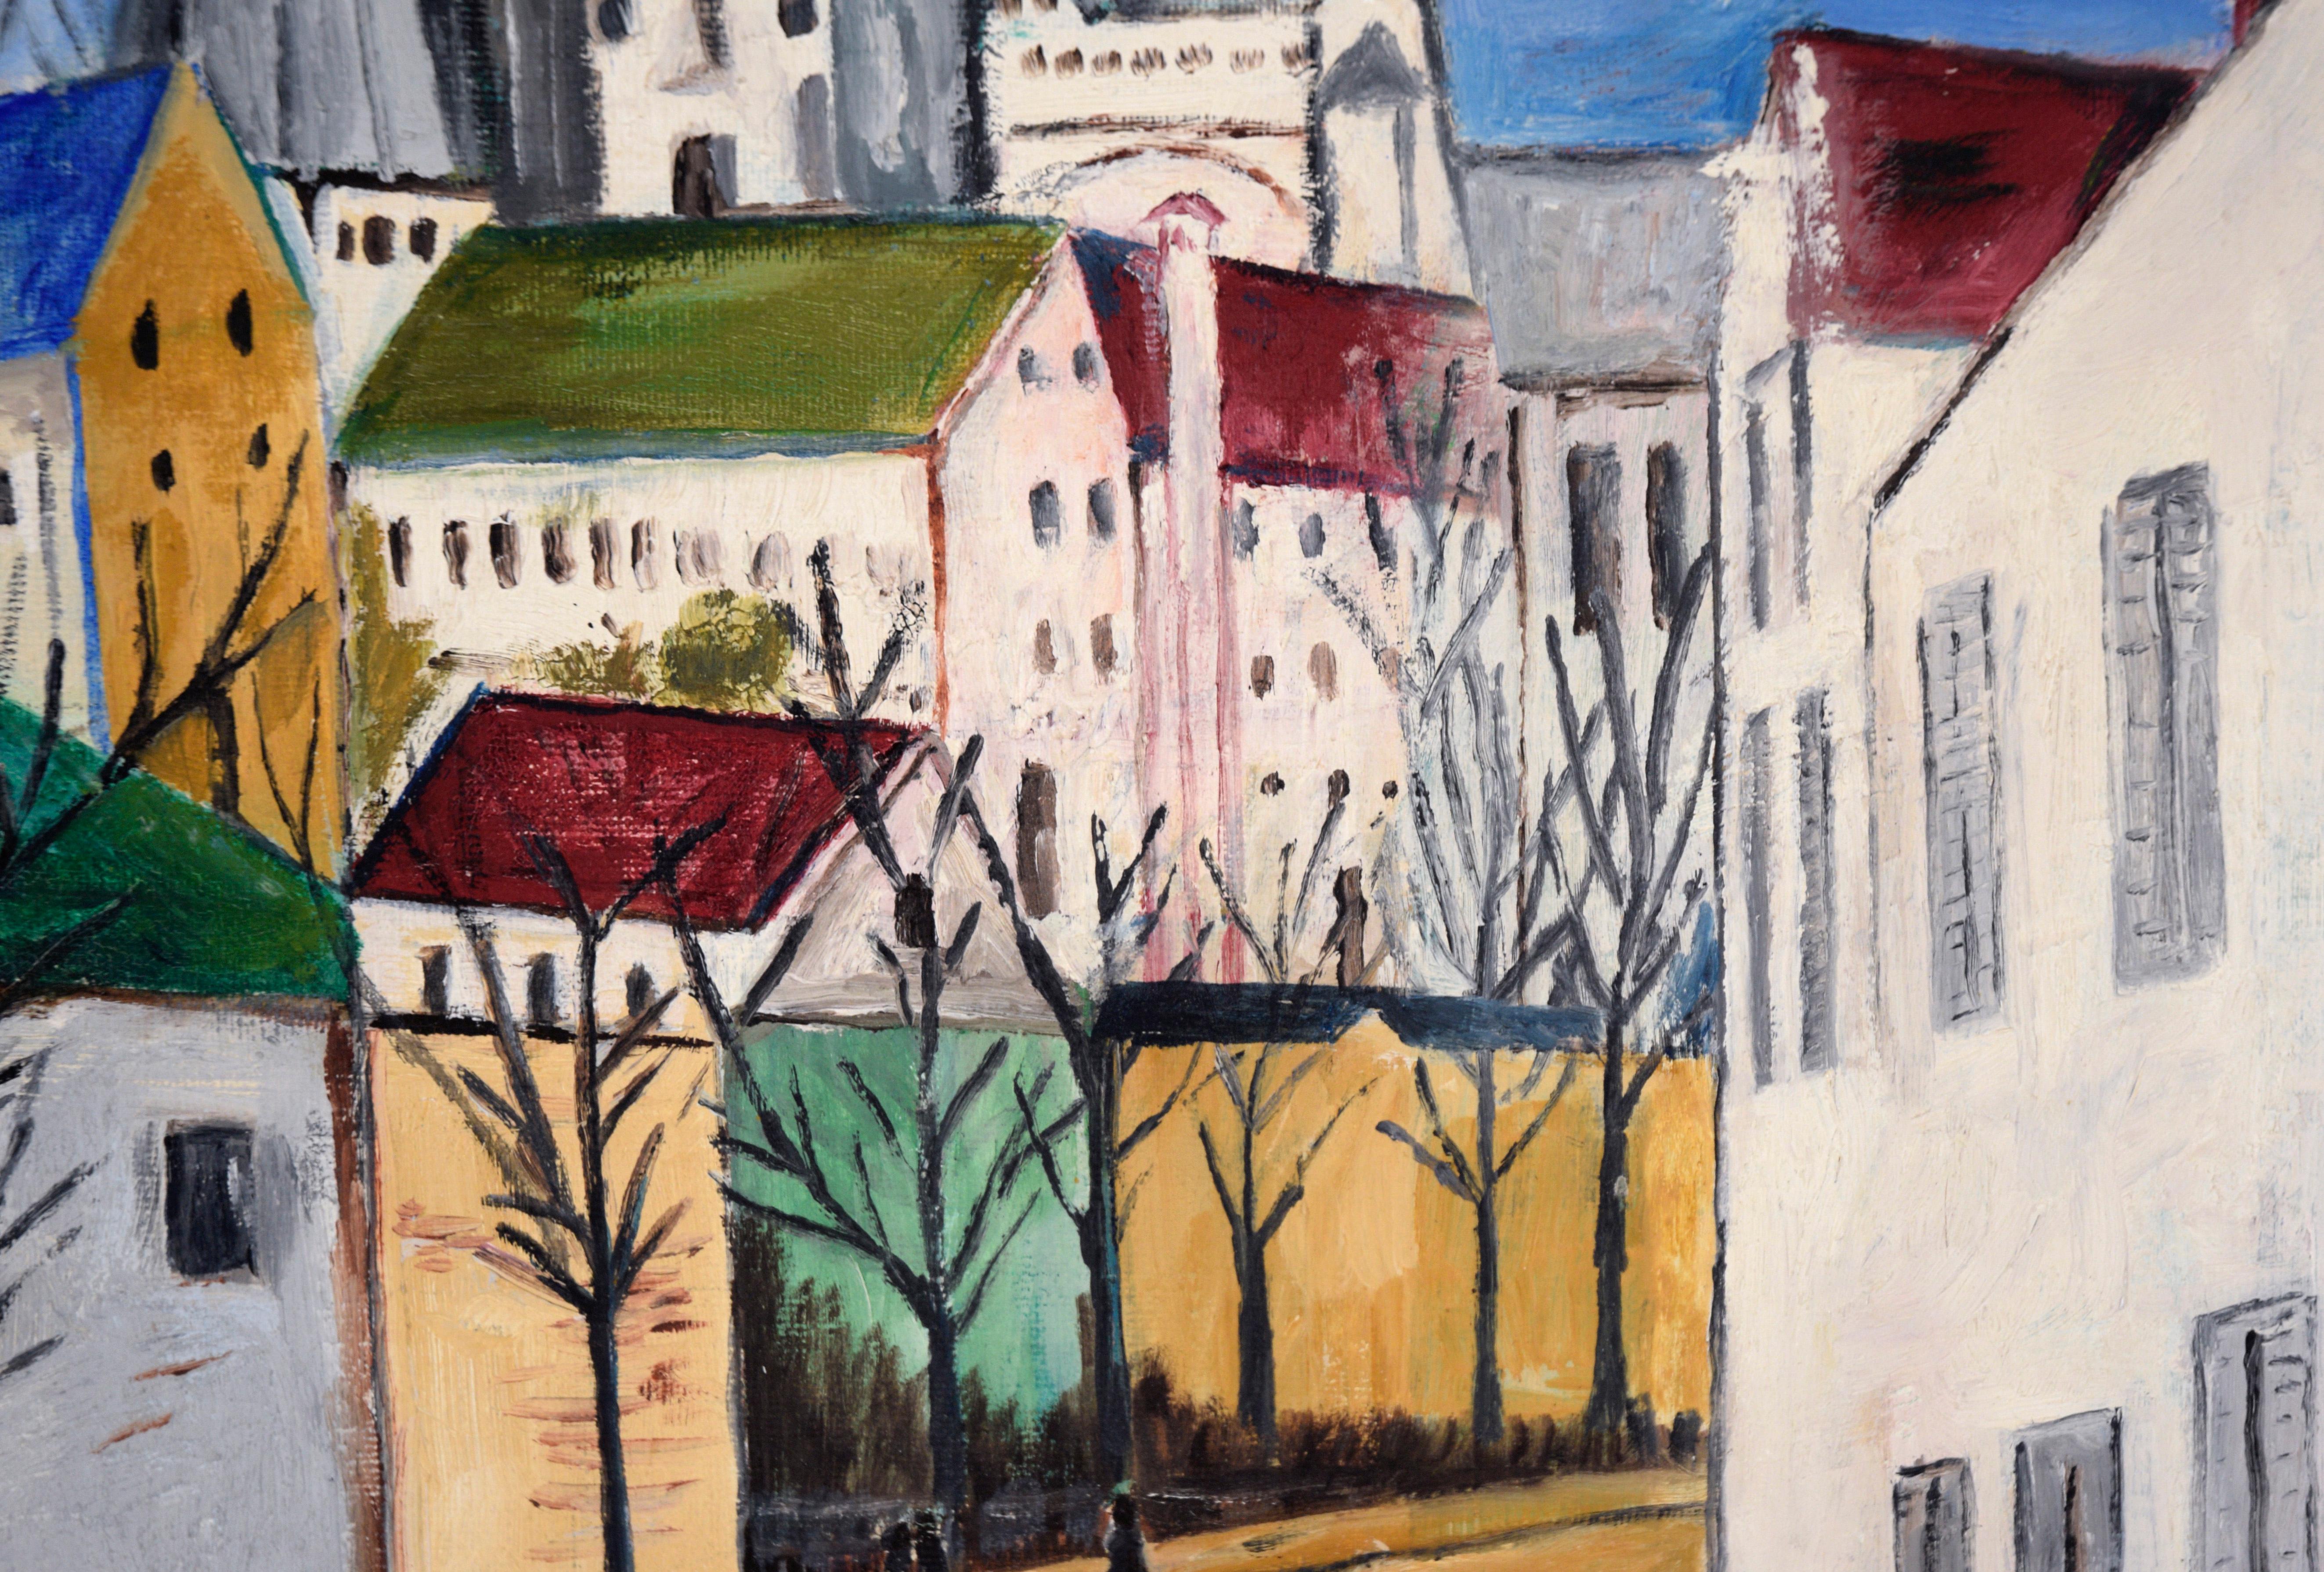 View of the Towers of Chartres Cathedral in Acrylic on Artist's Board

Colorful, idealistic representation of Chartres Cathedral and the surrounding area by Ben Venezky (American, 1895-1976). The viewer stands at the bottom of a road that appears to